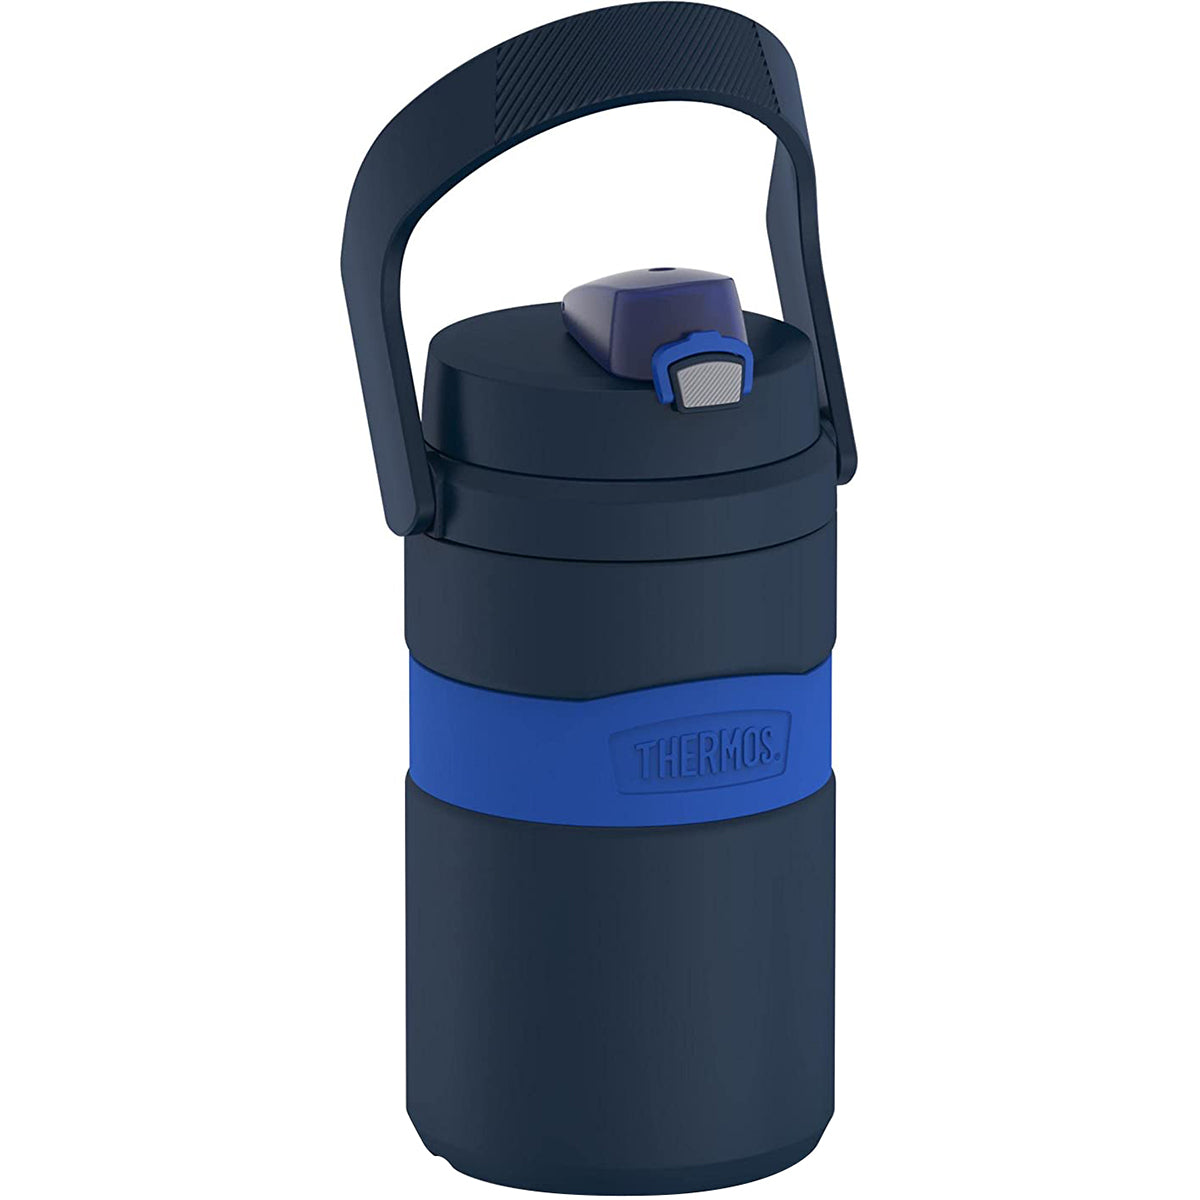 Thermos 64 oz. Foam Insulated Hydration Bottle Thermos